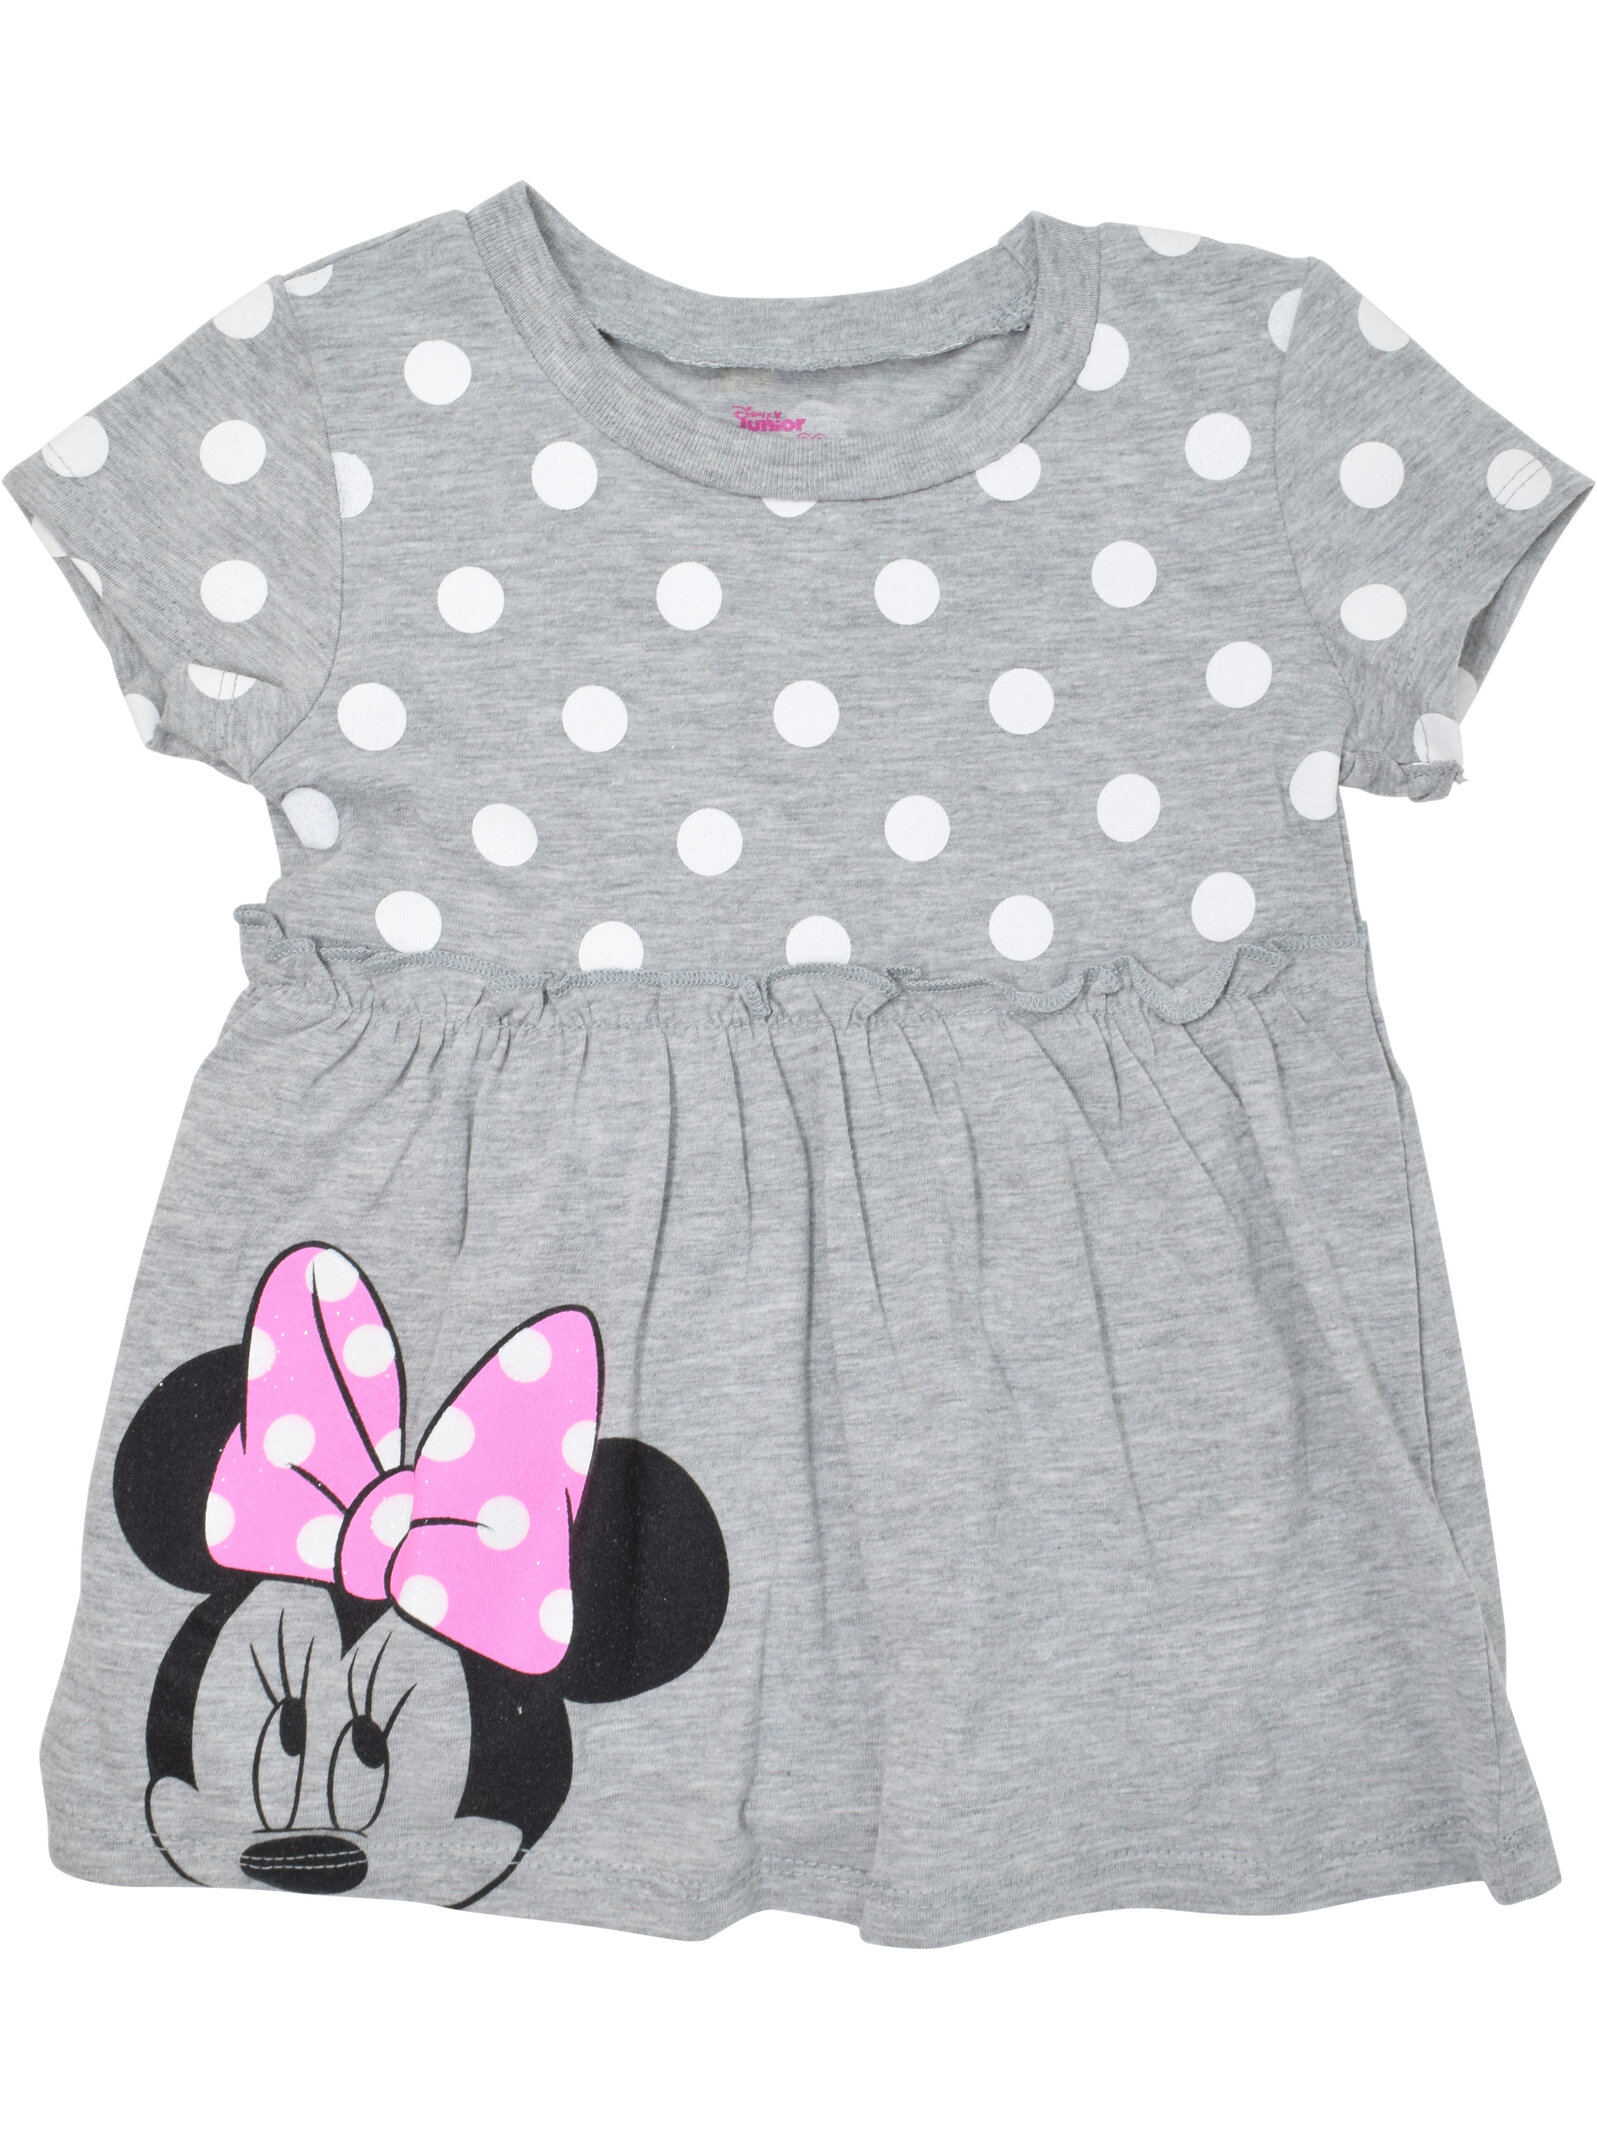 Disney Minnie Mouse Toddler Girls T-Shirt Dress and Leggings Outfit Set Infant to Big Kid - image 2 of 3